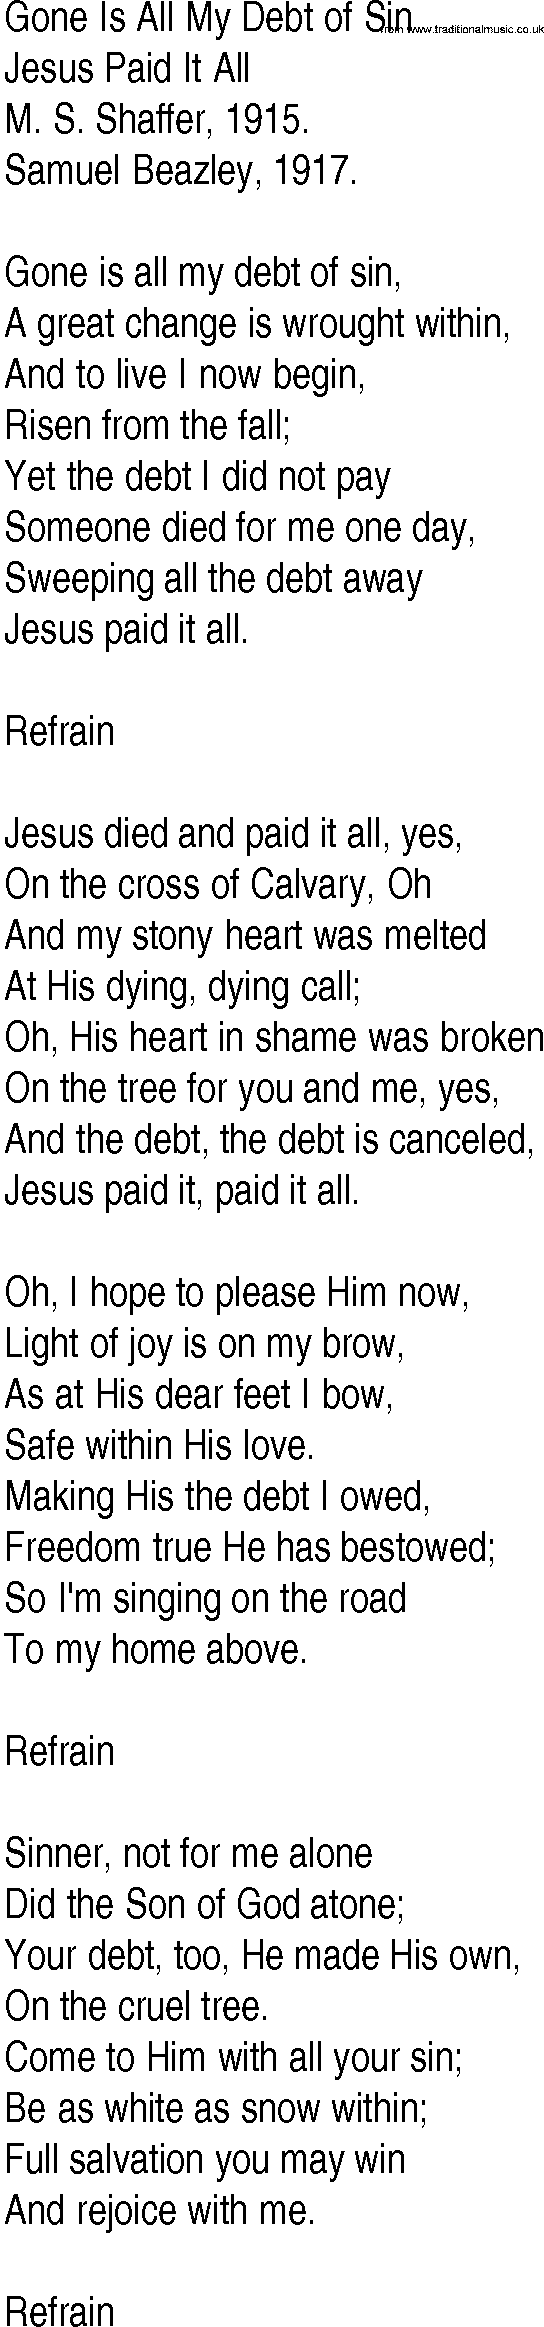 Hymn and Gospel Song: Gone Is All My Debt of Sin by M S Shaffer lyrics